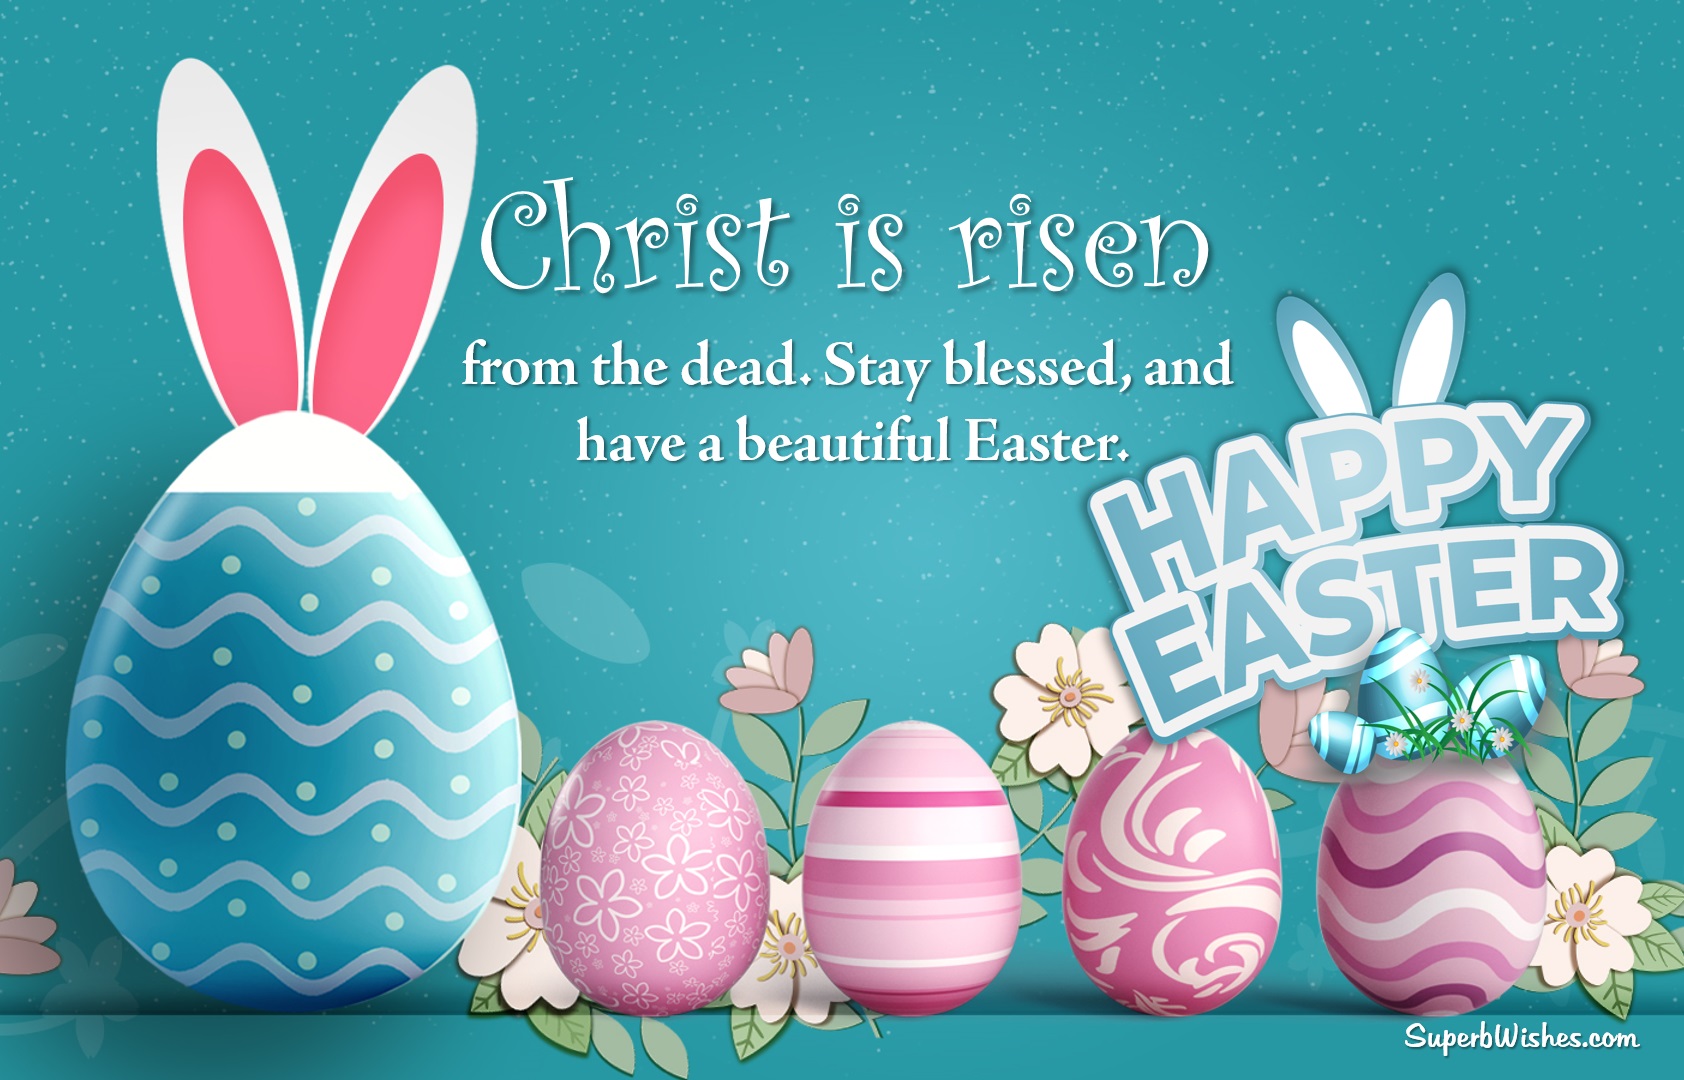 Easter Images He Is Risen by SuperbWishes